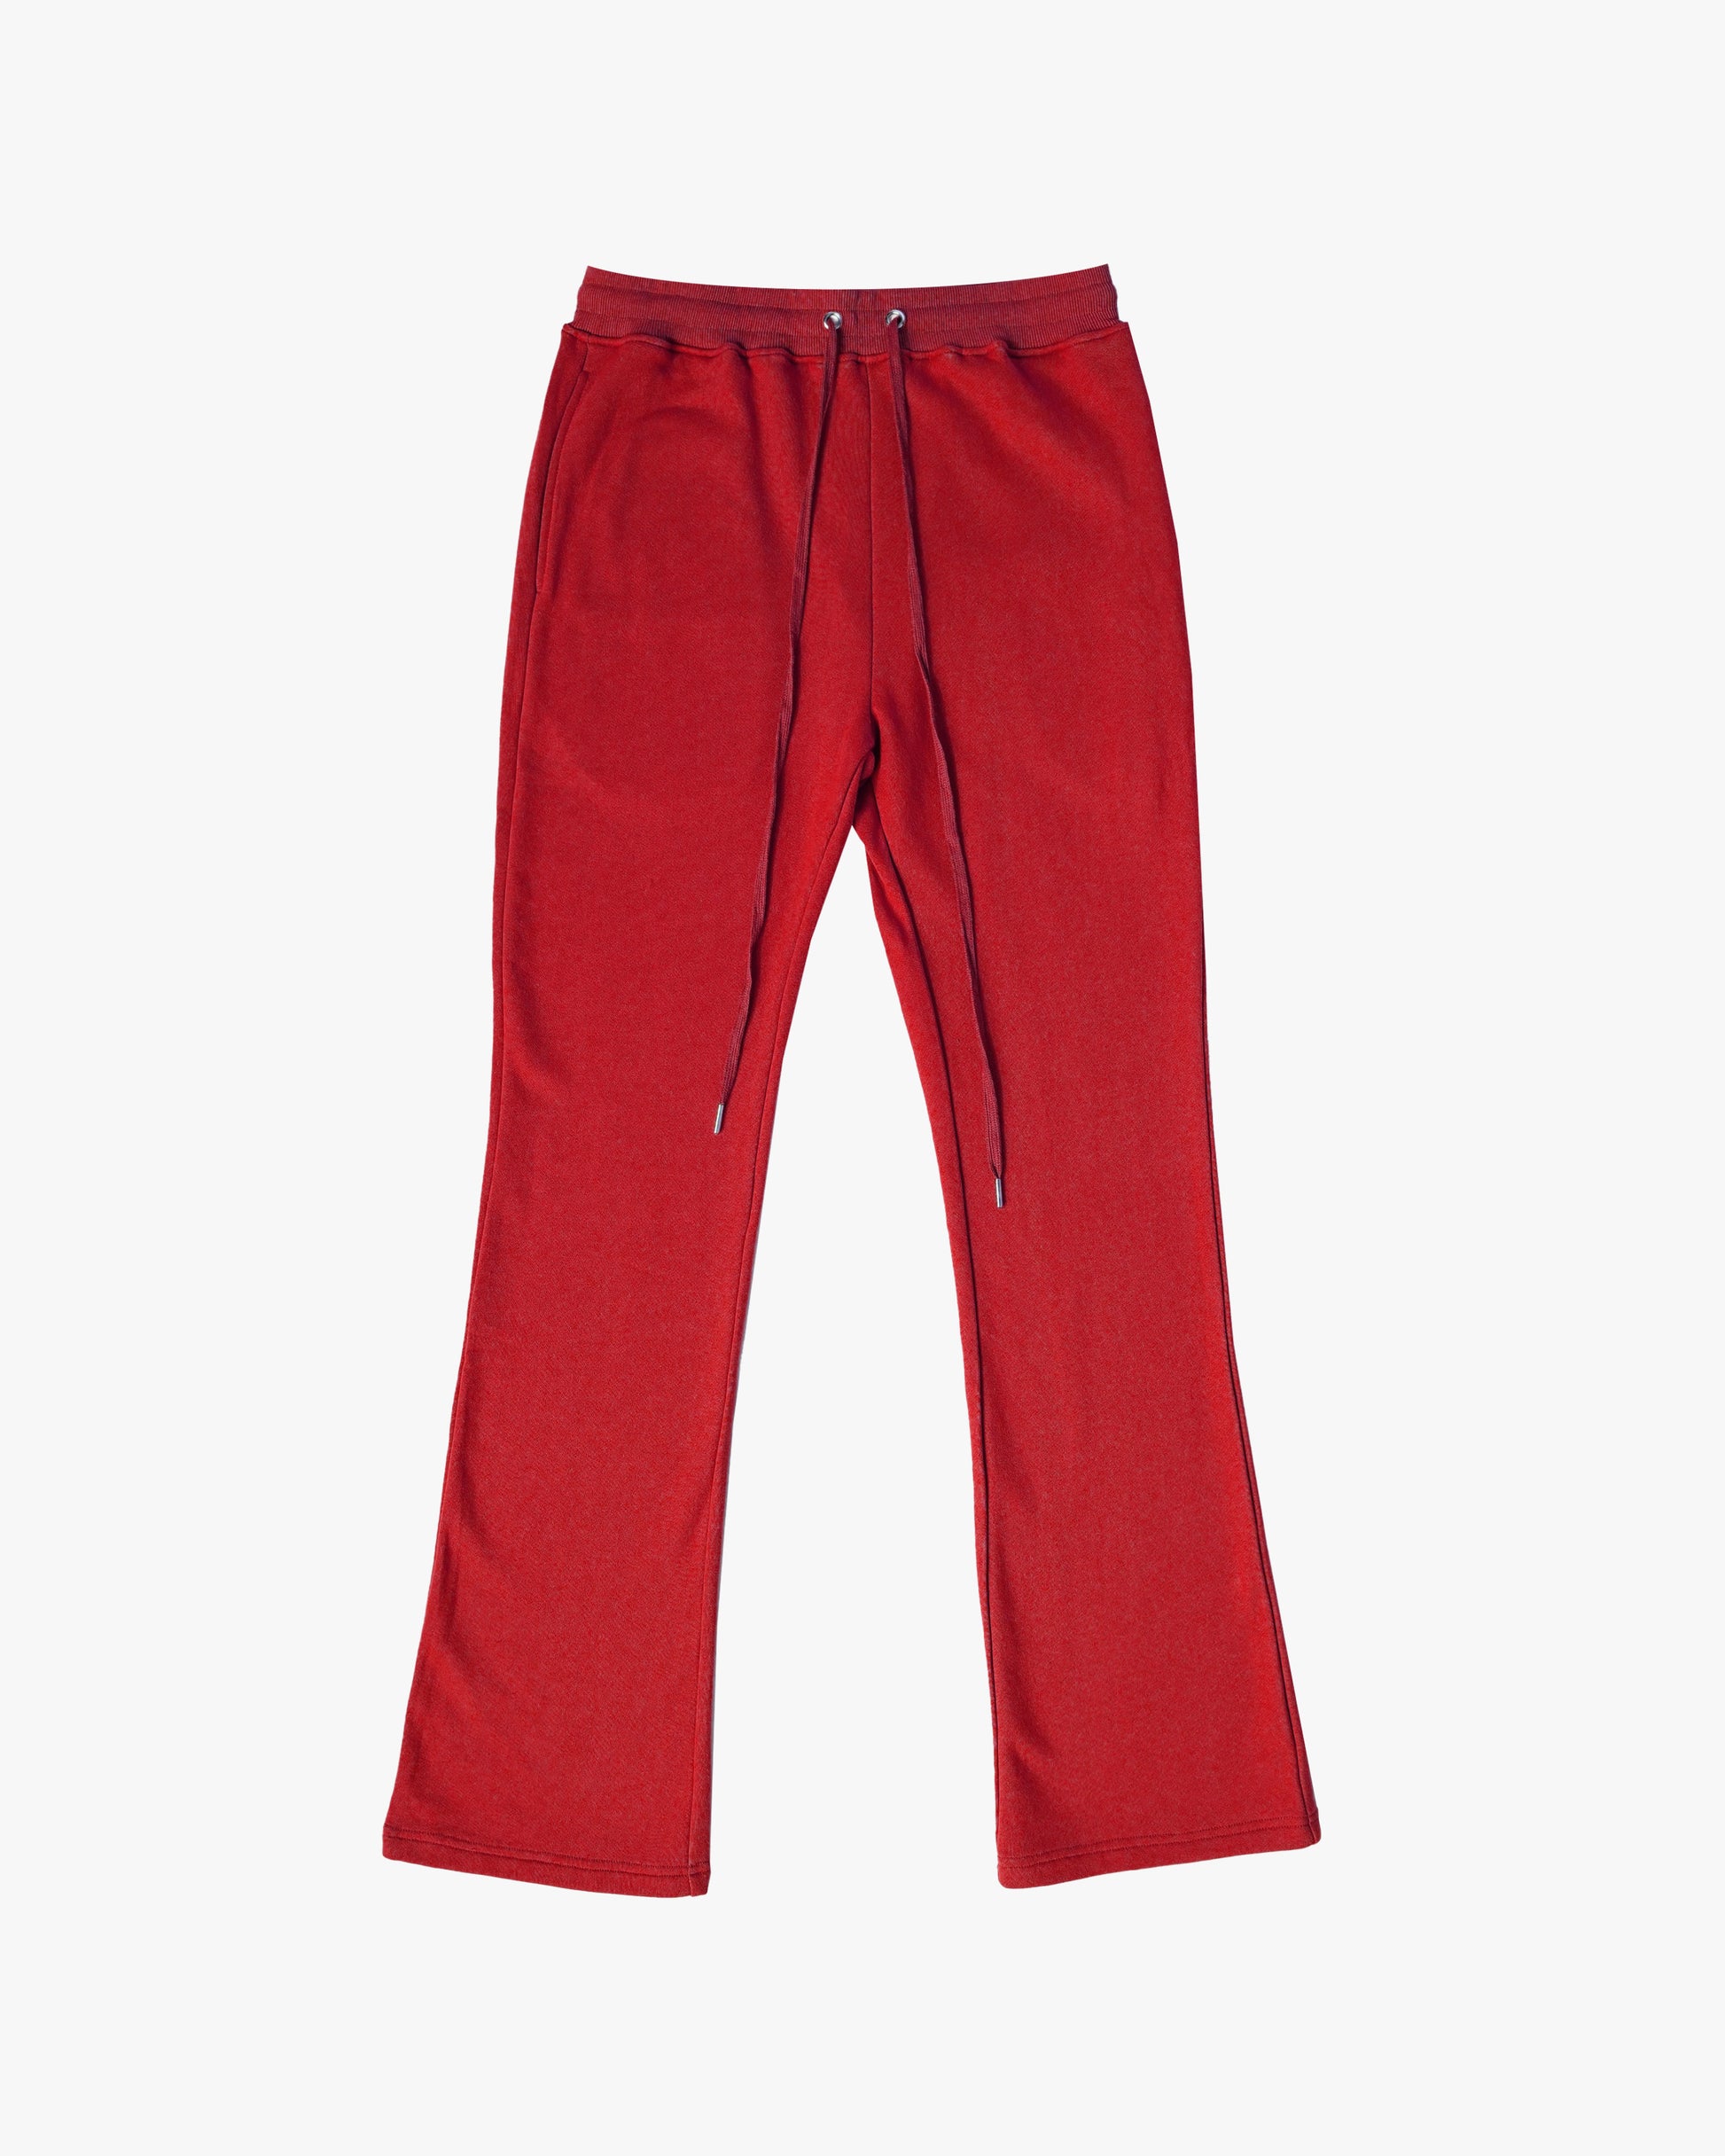 PERFECT FLARE SWEATPANTS-RED – EPTM.